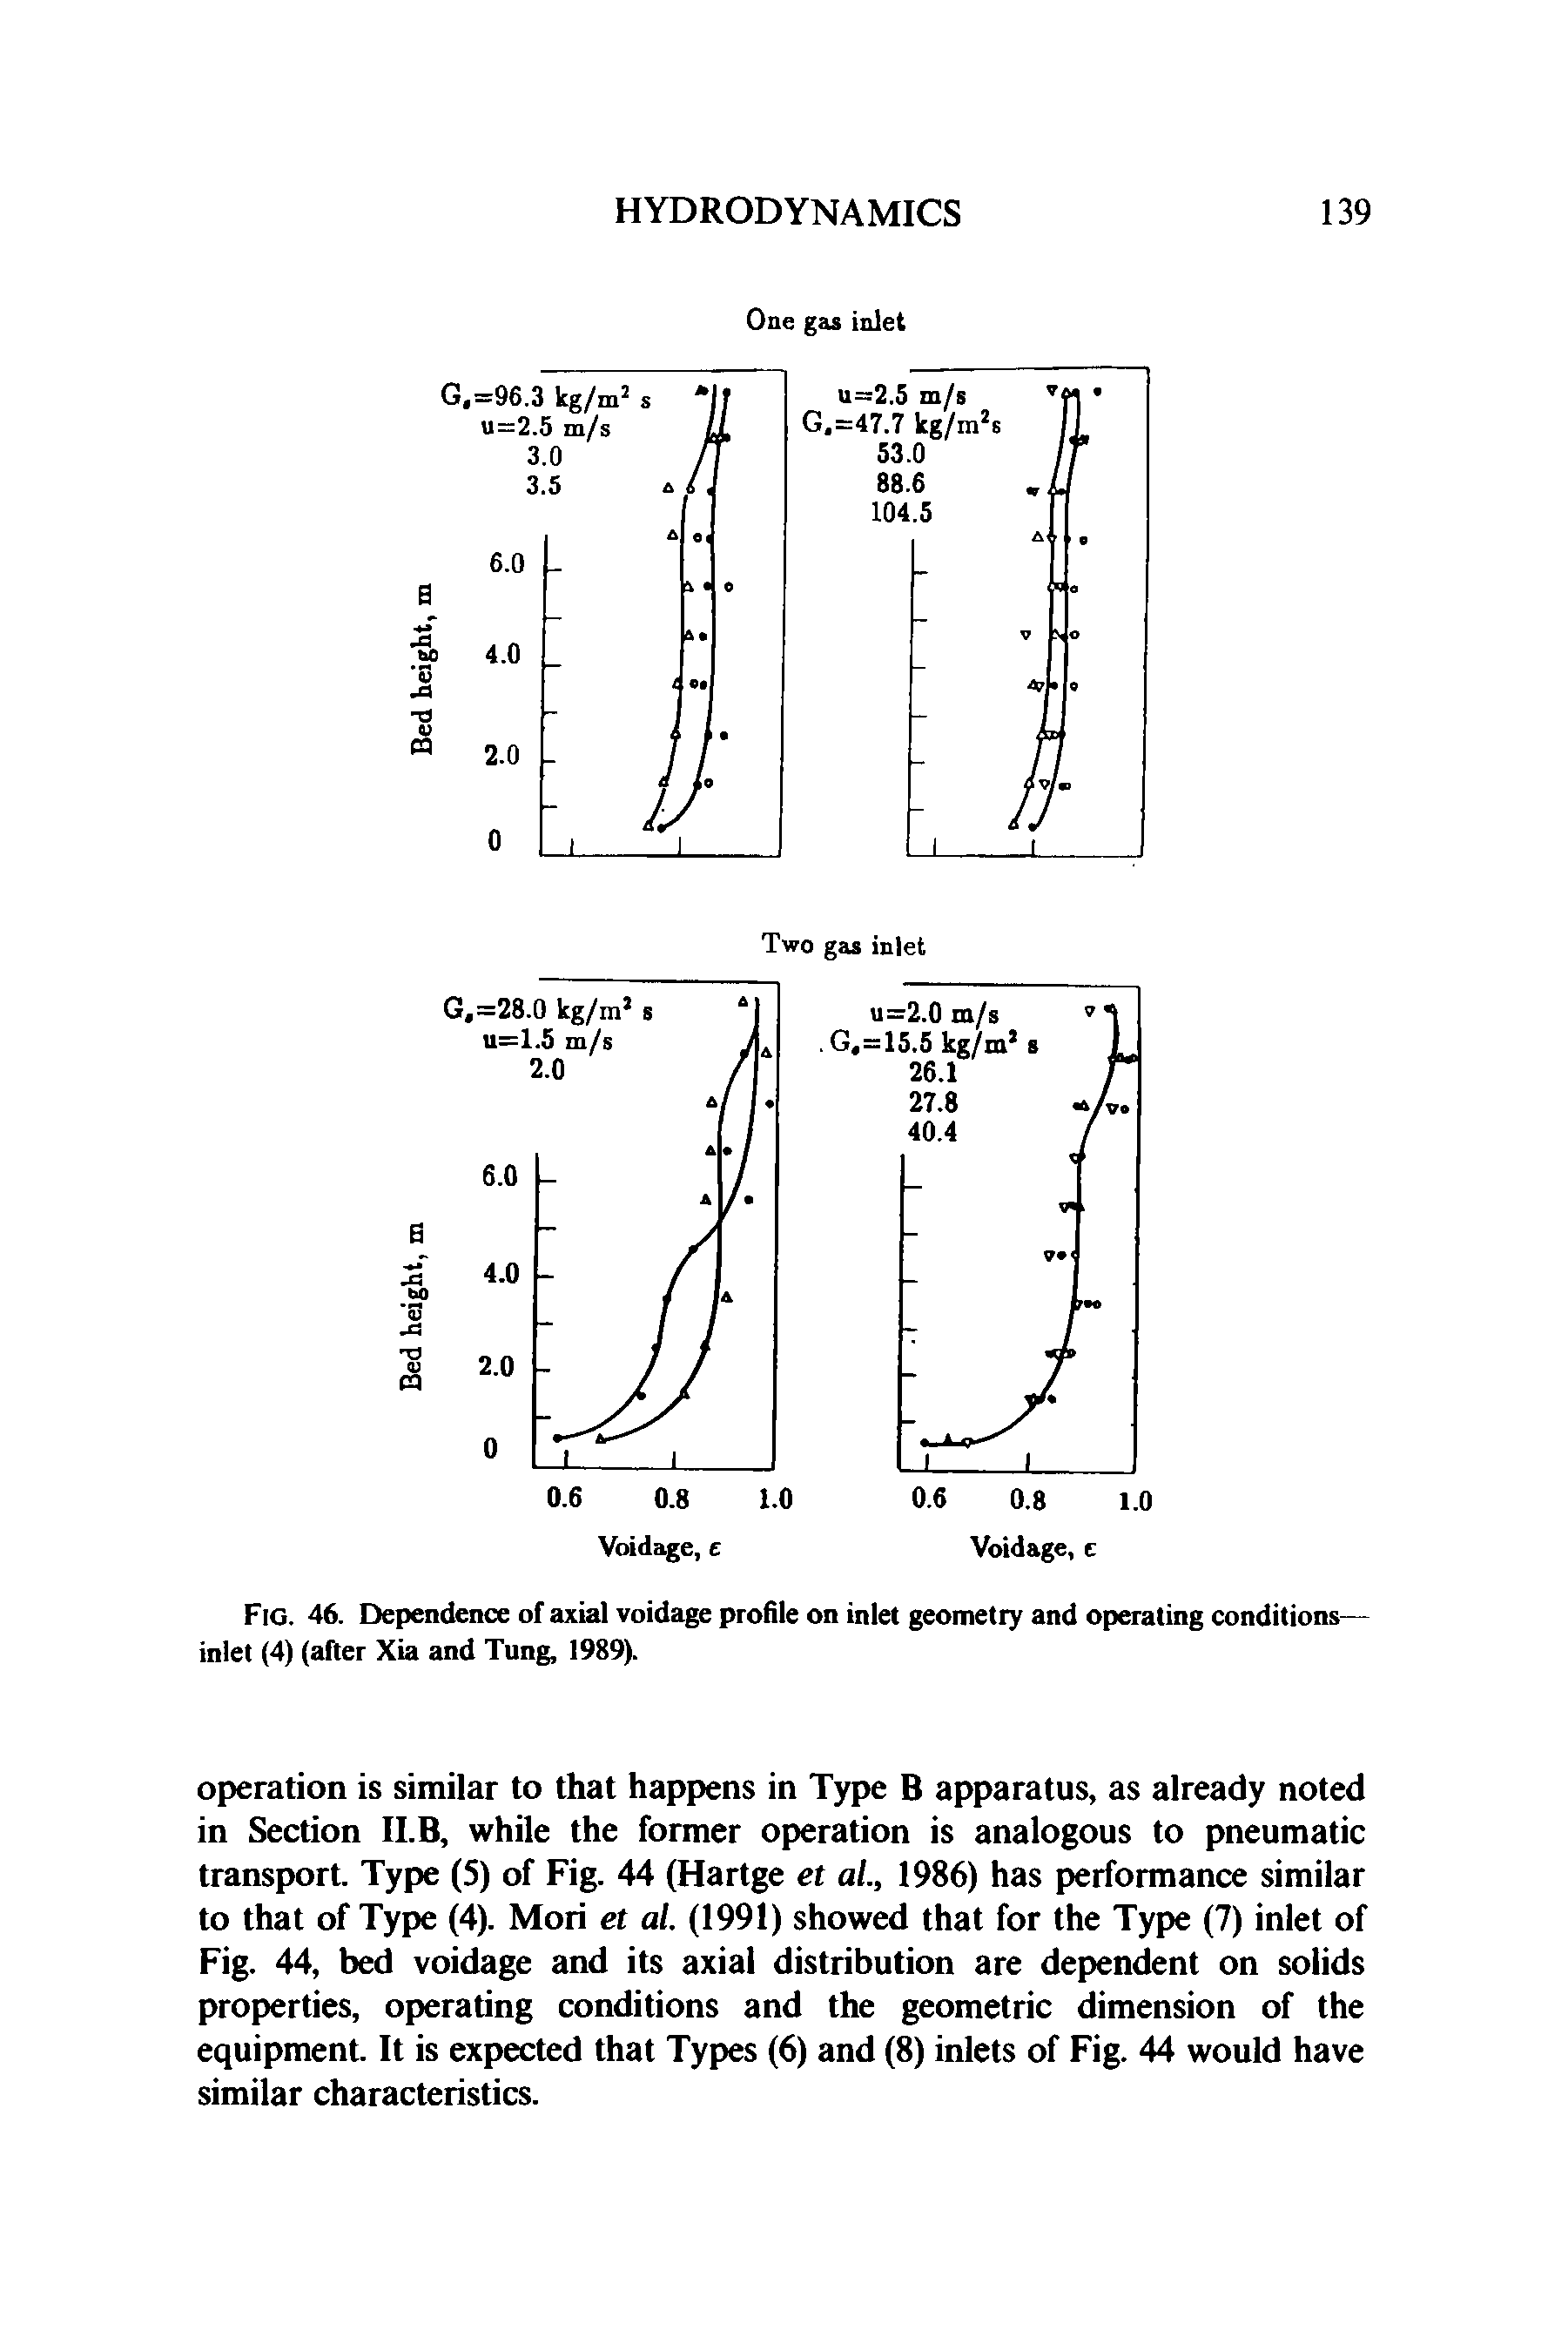 Fig. 46. Dependence of axial voidage profile on inlet geometry and operating conditions— inlet (4) (after Xia and Tung, 1989).